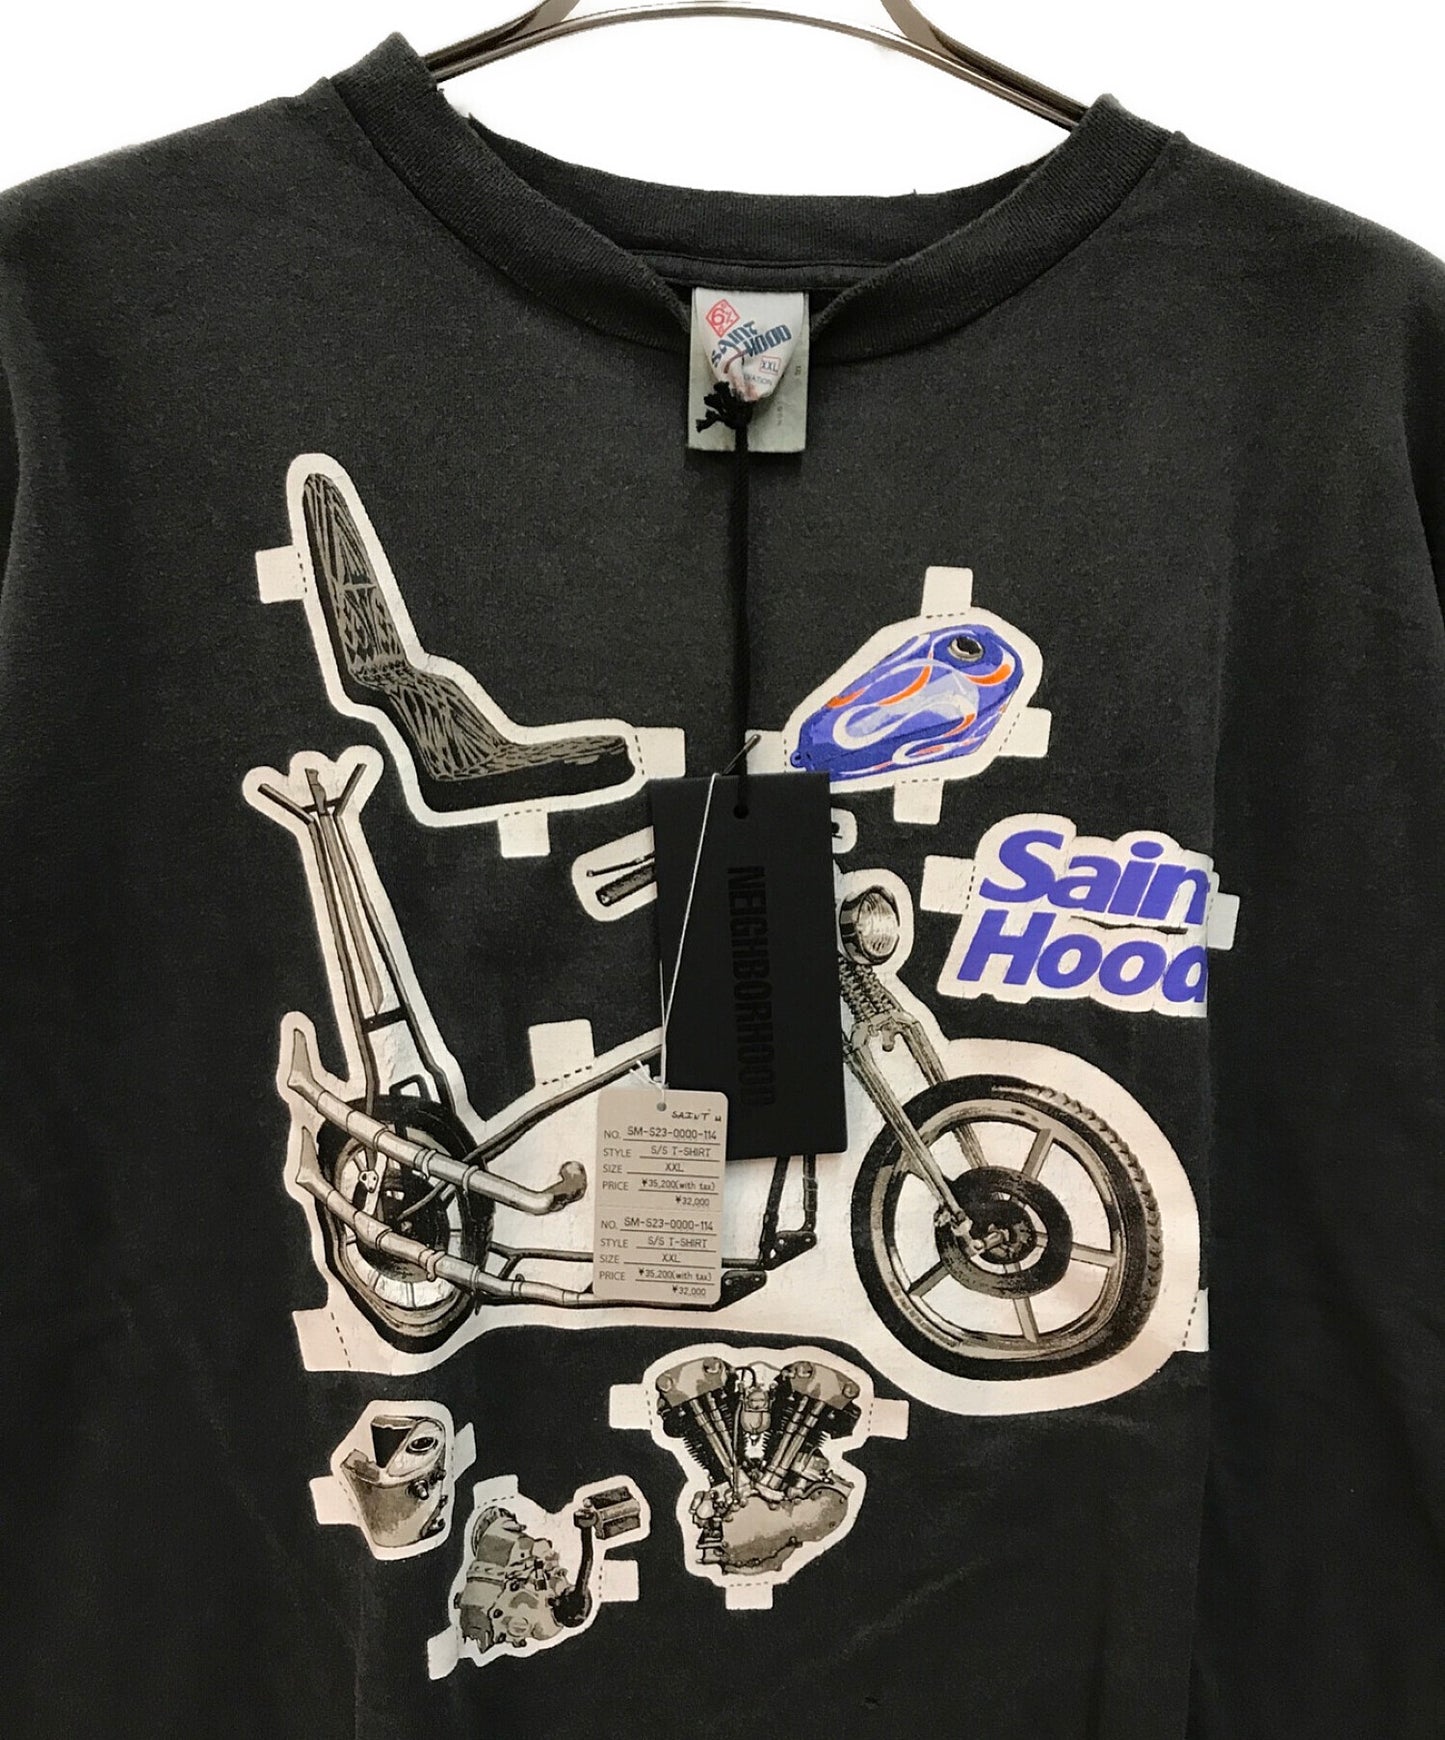 [Pre-owned] SAINT MICHAEL STHD SS TEE/BIKE Motorcycle Print Damaged T-Shirt Short Sleeve Cut and Sewn sm-s23-0000-114/23119smn-csm01s